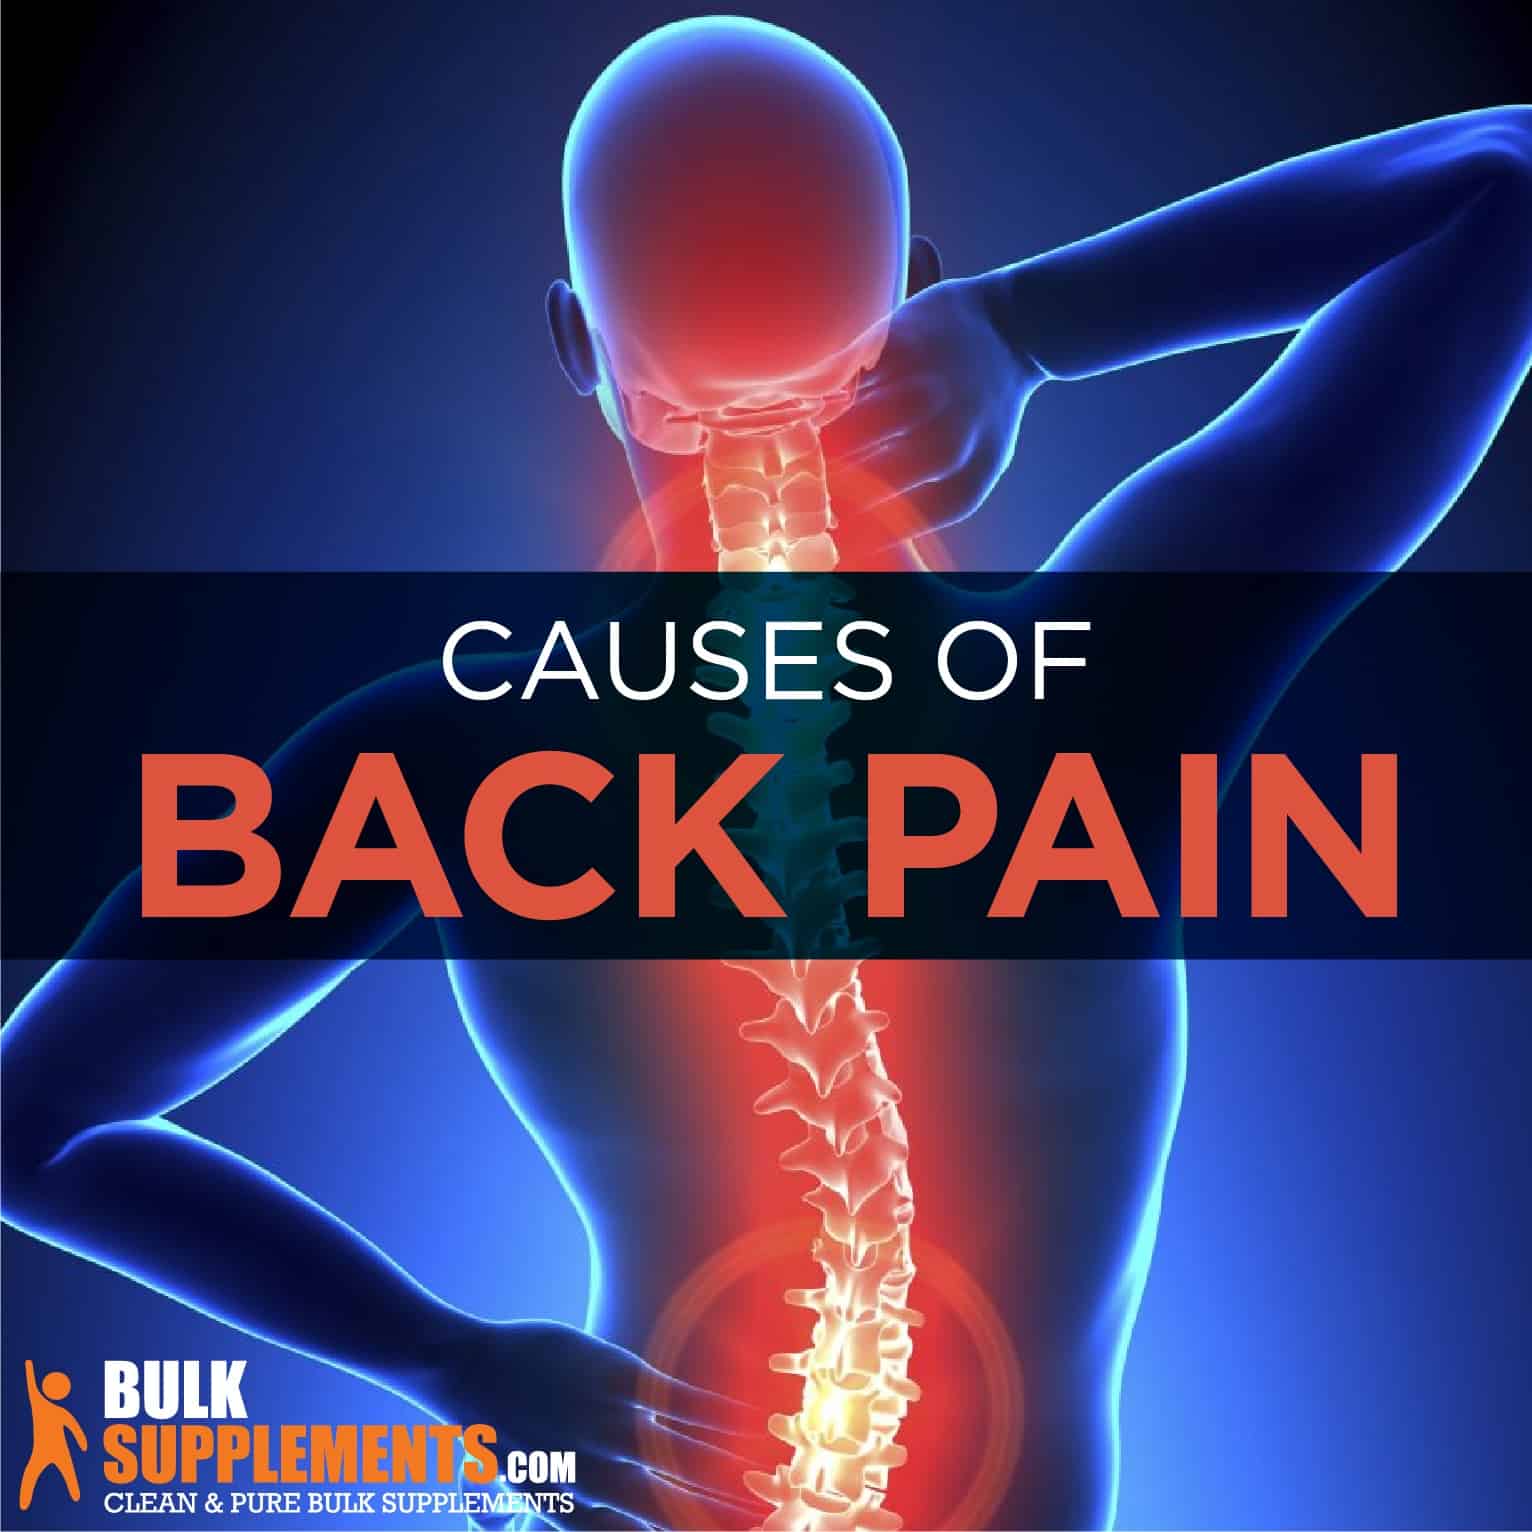 Causes of back pain and back pain treatment